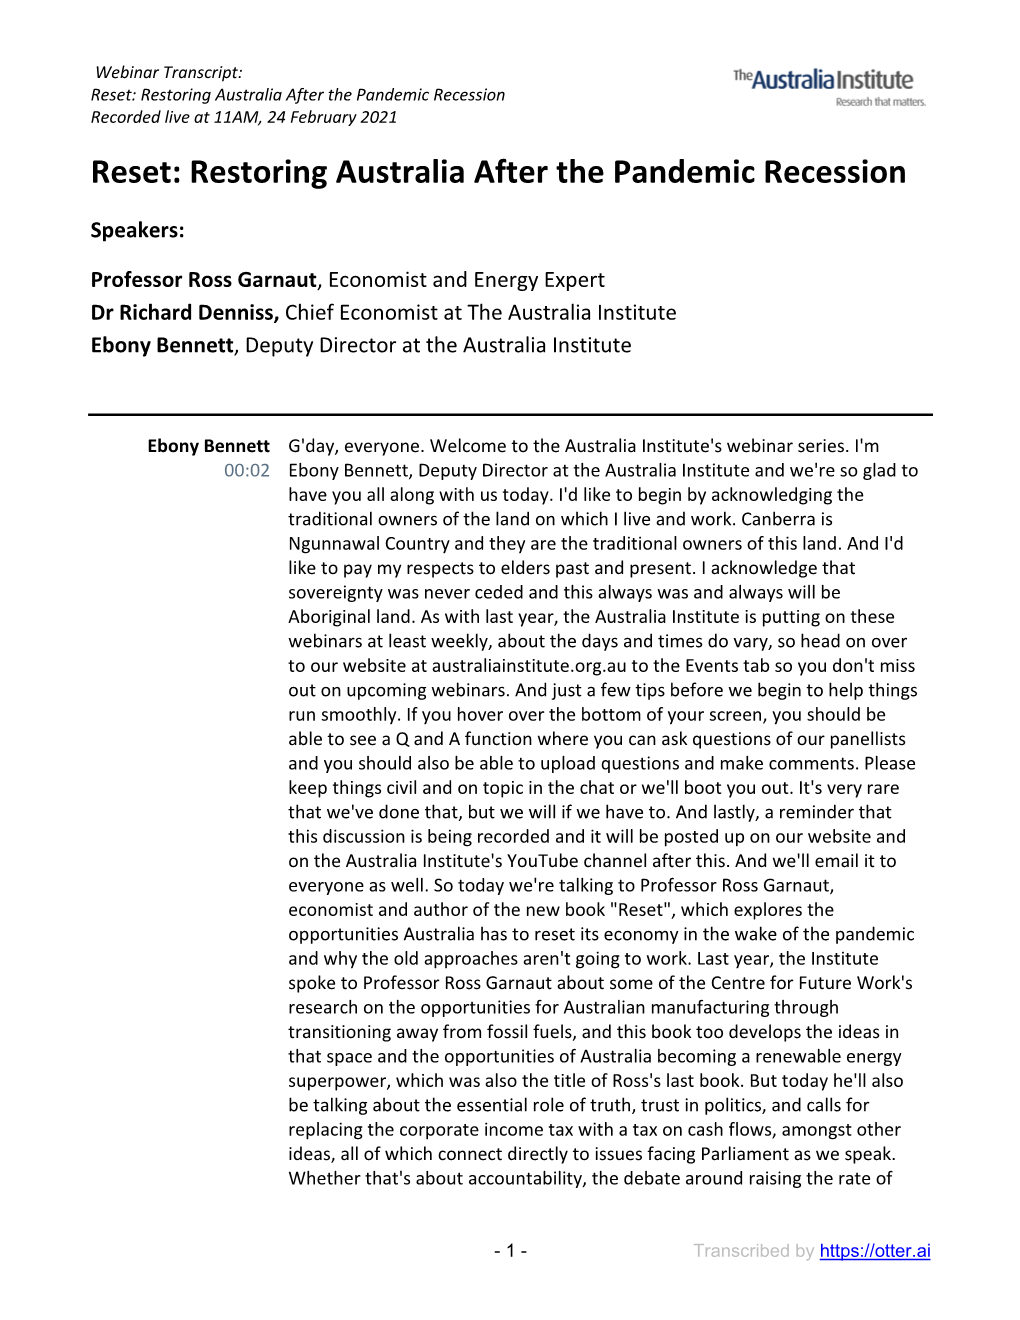 Reset: Restoring Australia After the Pandemic Recession Recorded Live at 11AM, 24 February 2021